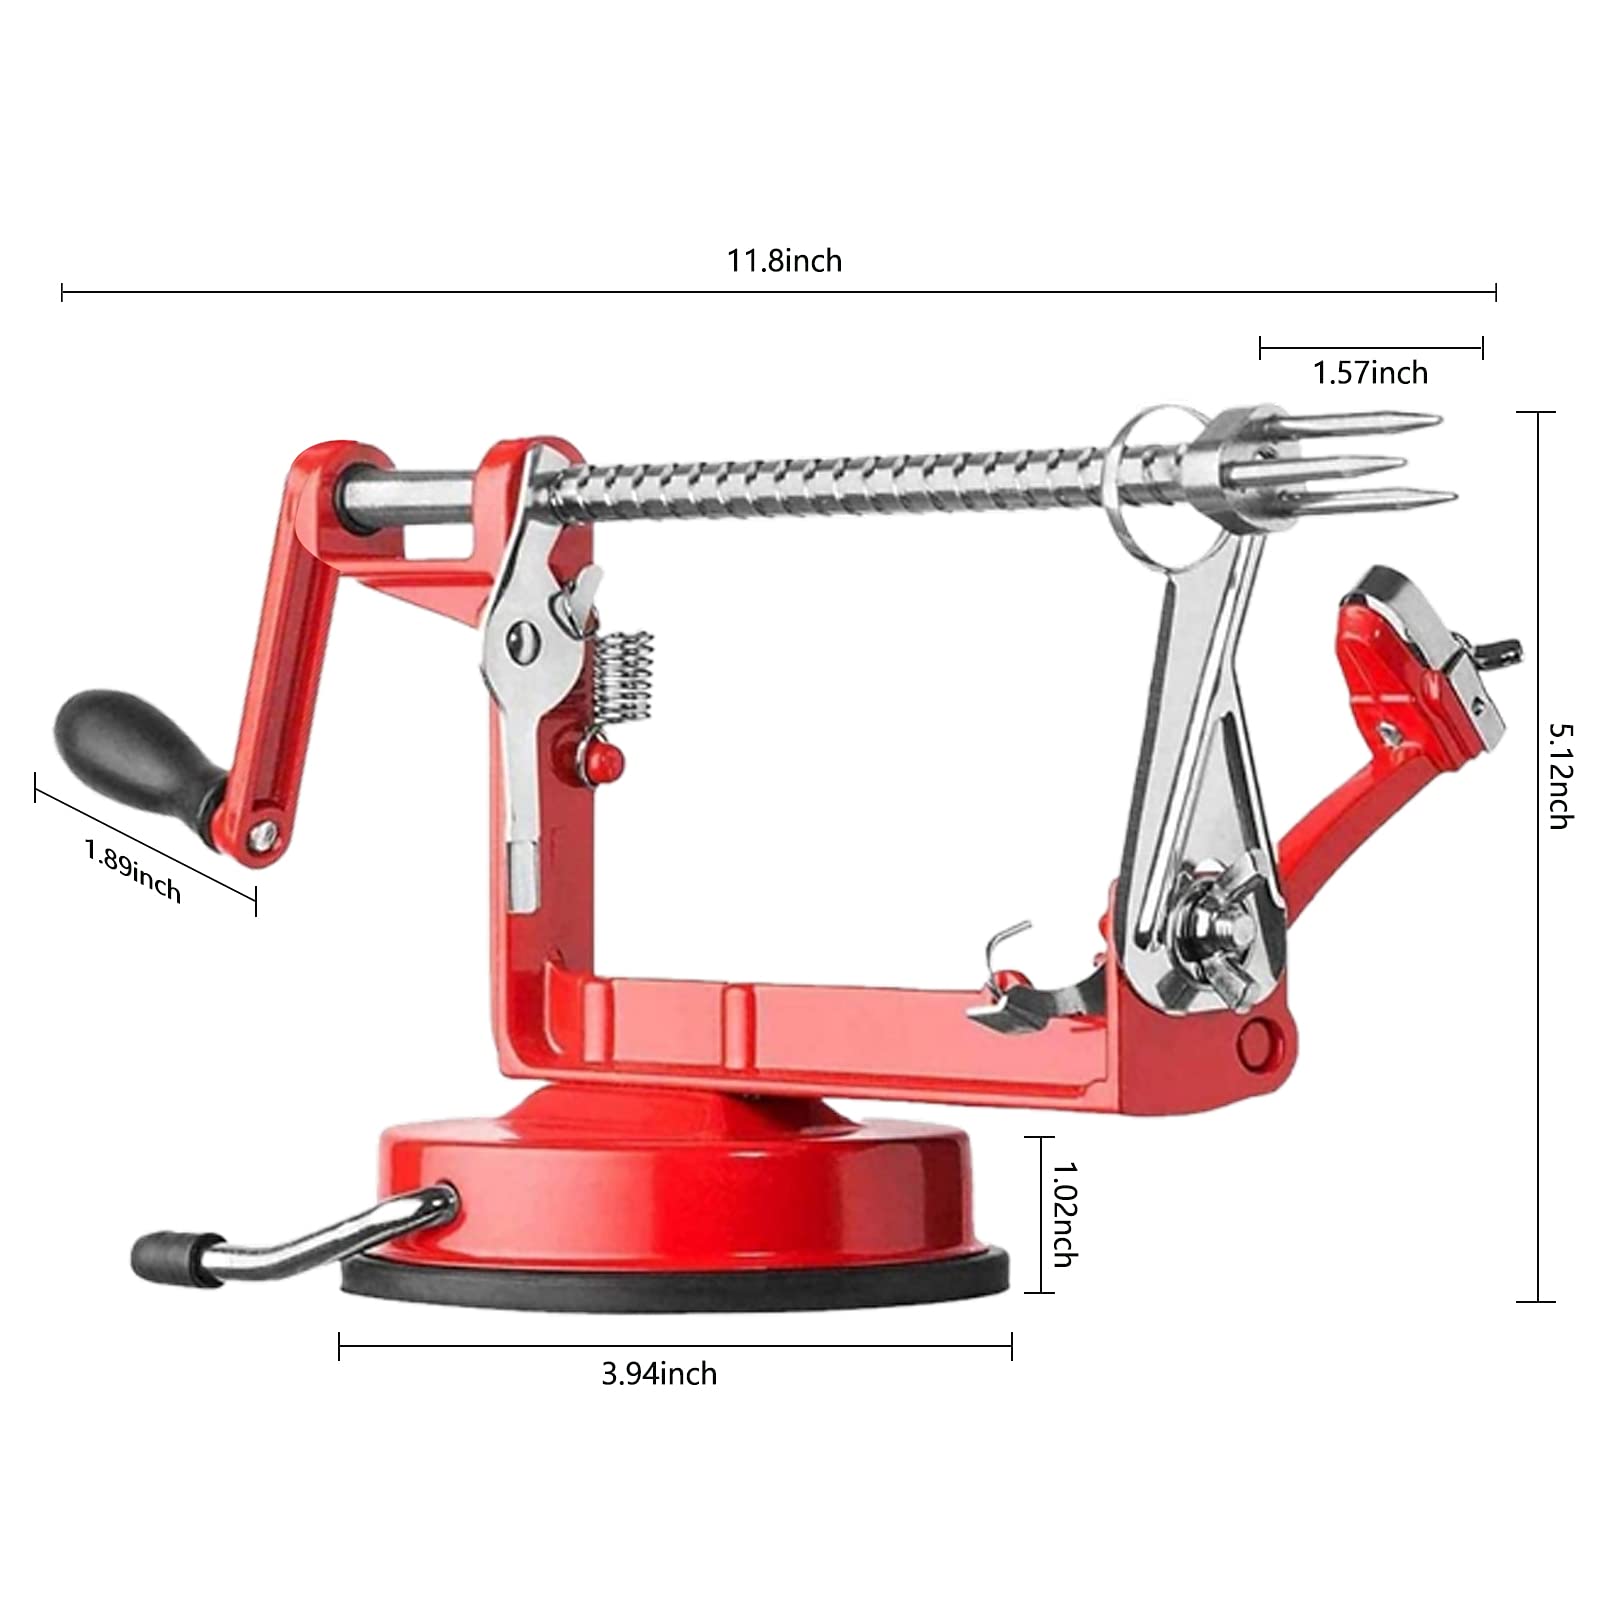 Apple Peeler Corer, Long lasting Chrome Cast Magnesium Alloy Apple Peeler Slicer Corer with Stainless Steel Blades and Powerful Suction Base for Apples and Potato(Red)